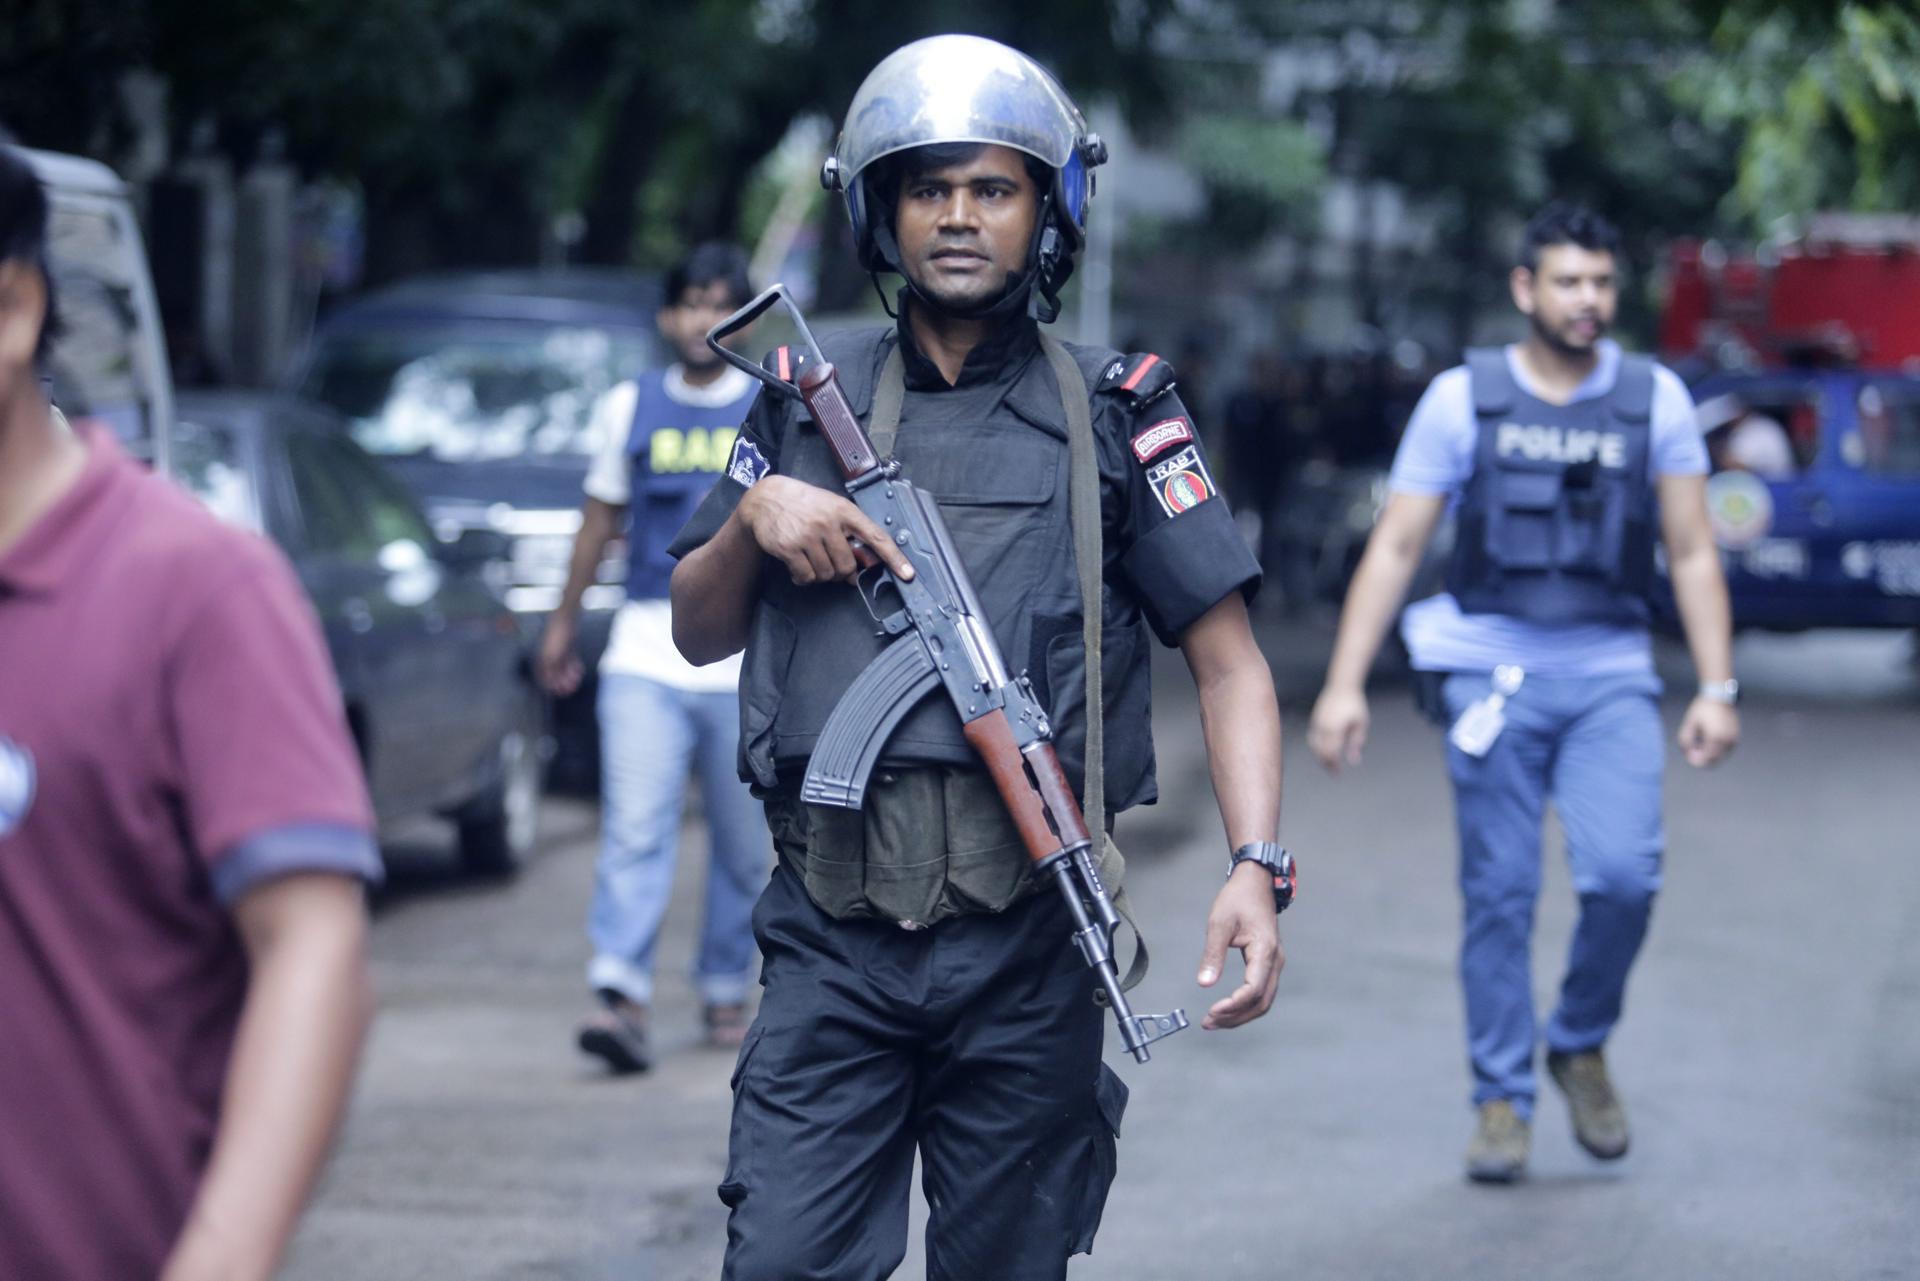 A file picture depicting Rapid Action Battalion (RAB) members patrolling the streets in Dhaka, Bangladesh. EFE/EPA/FILE/STRINGER